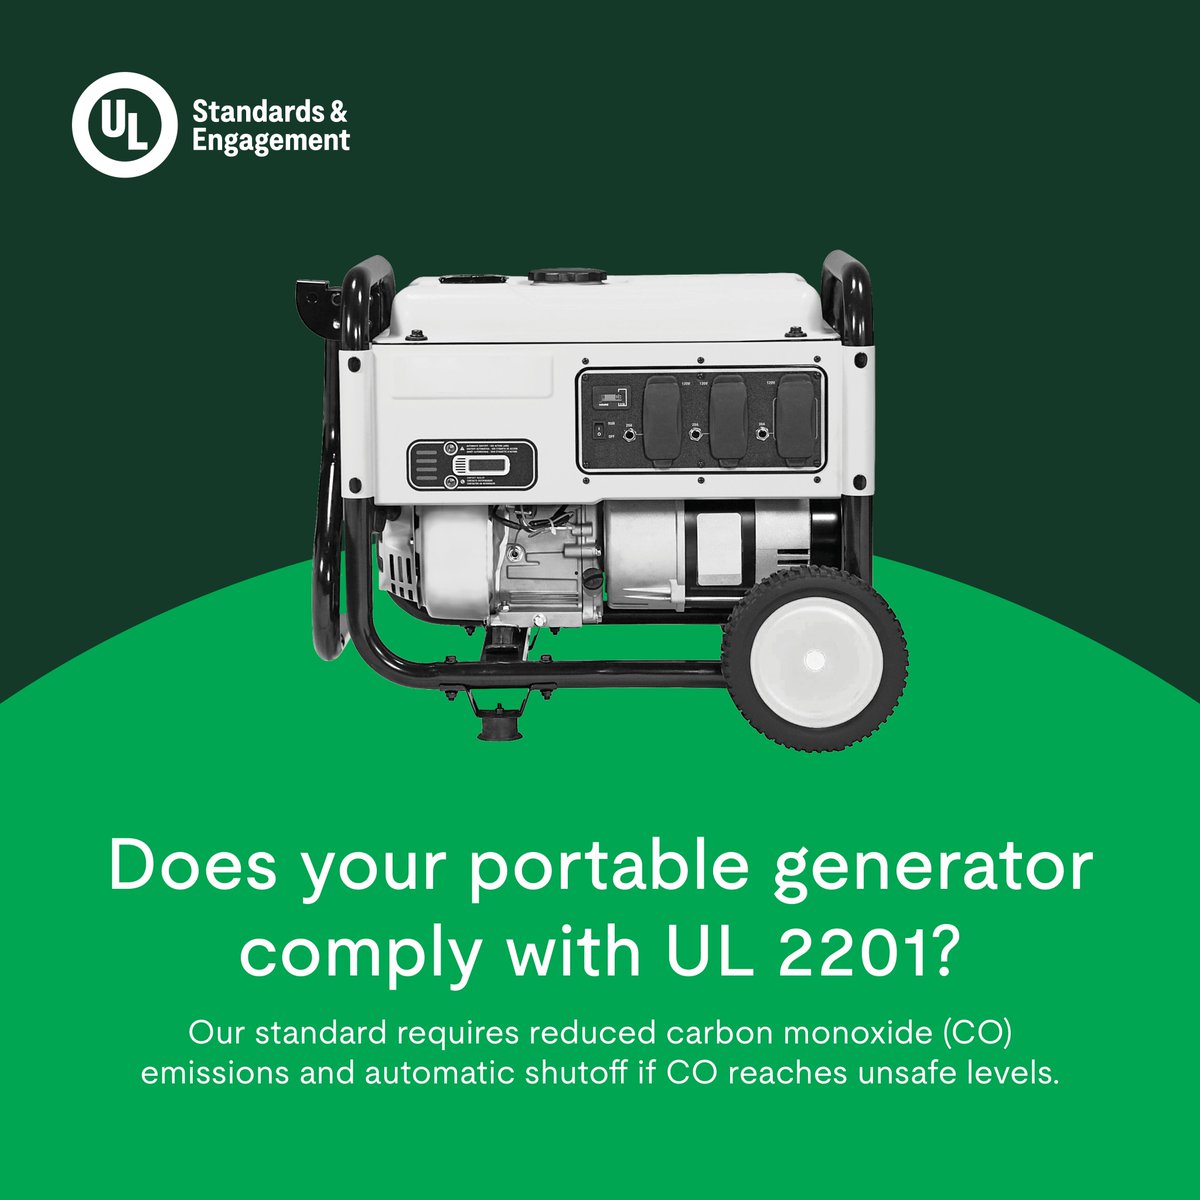 One month until the official start hurricane season—and @Accuweather says it’s going to be “explosive.” 🌀

Are generators part of your #hurricaneprep plan? Make sure you’re using them correctly and that your device conforms to safety standards. S.ul.org/3UnbWOQ